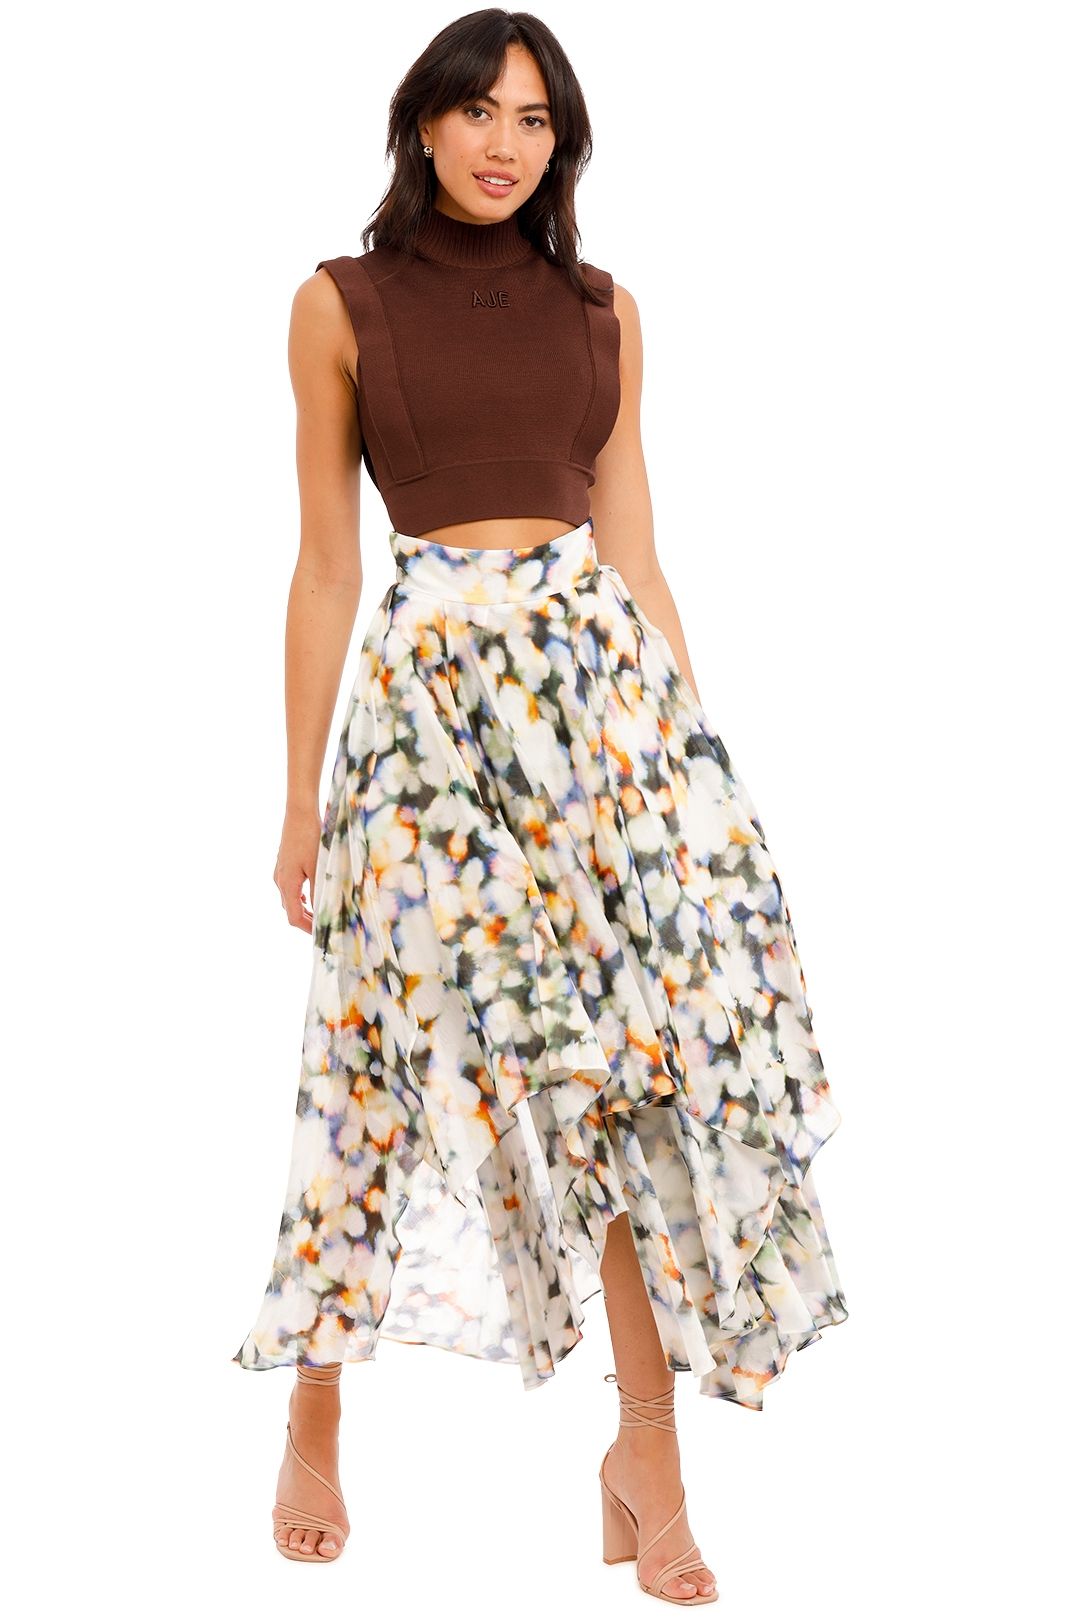 Lumiere Skirt in Lumiere Ginger and Smart print